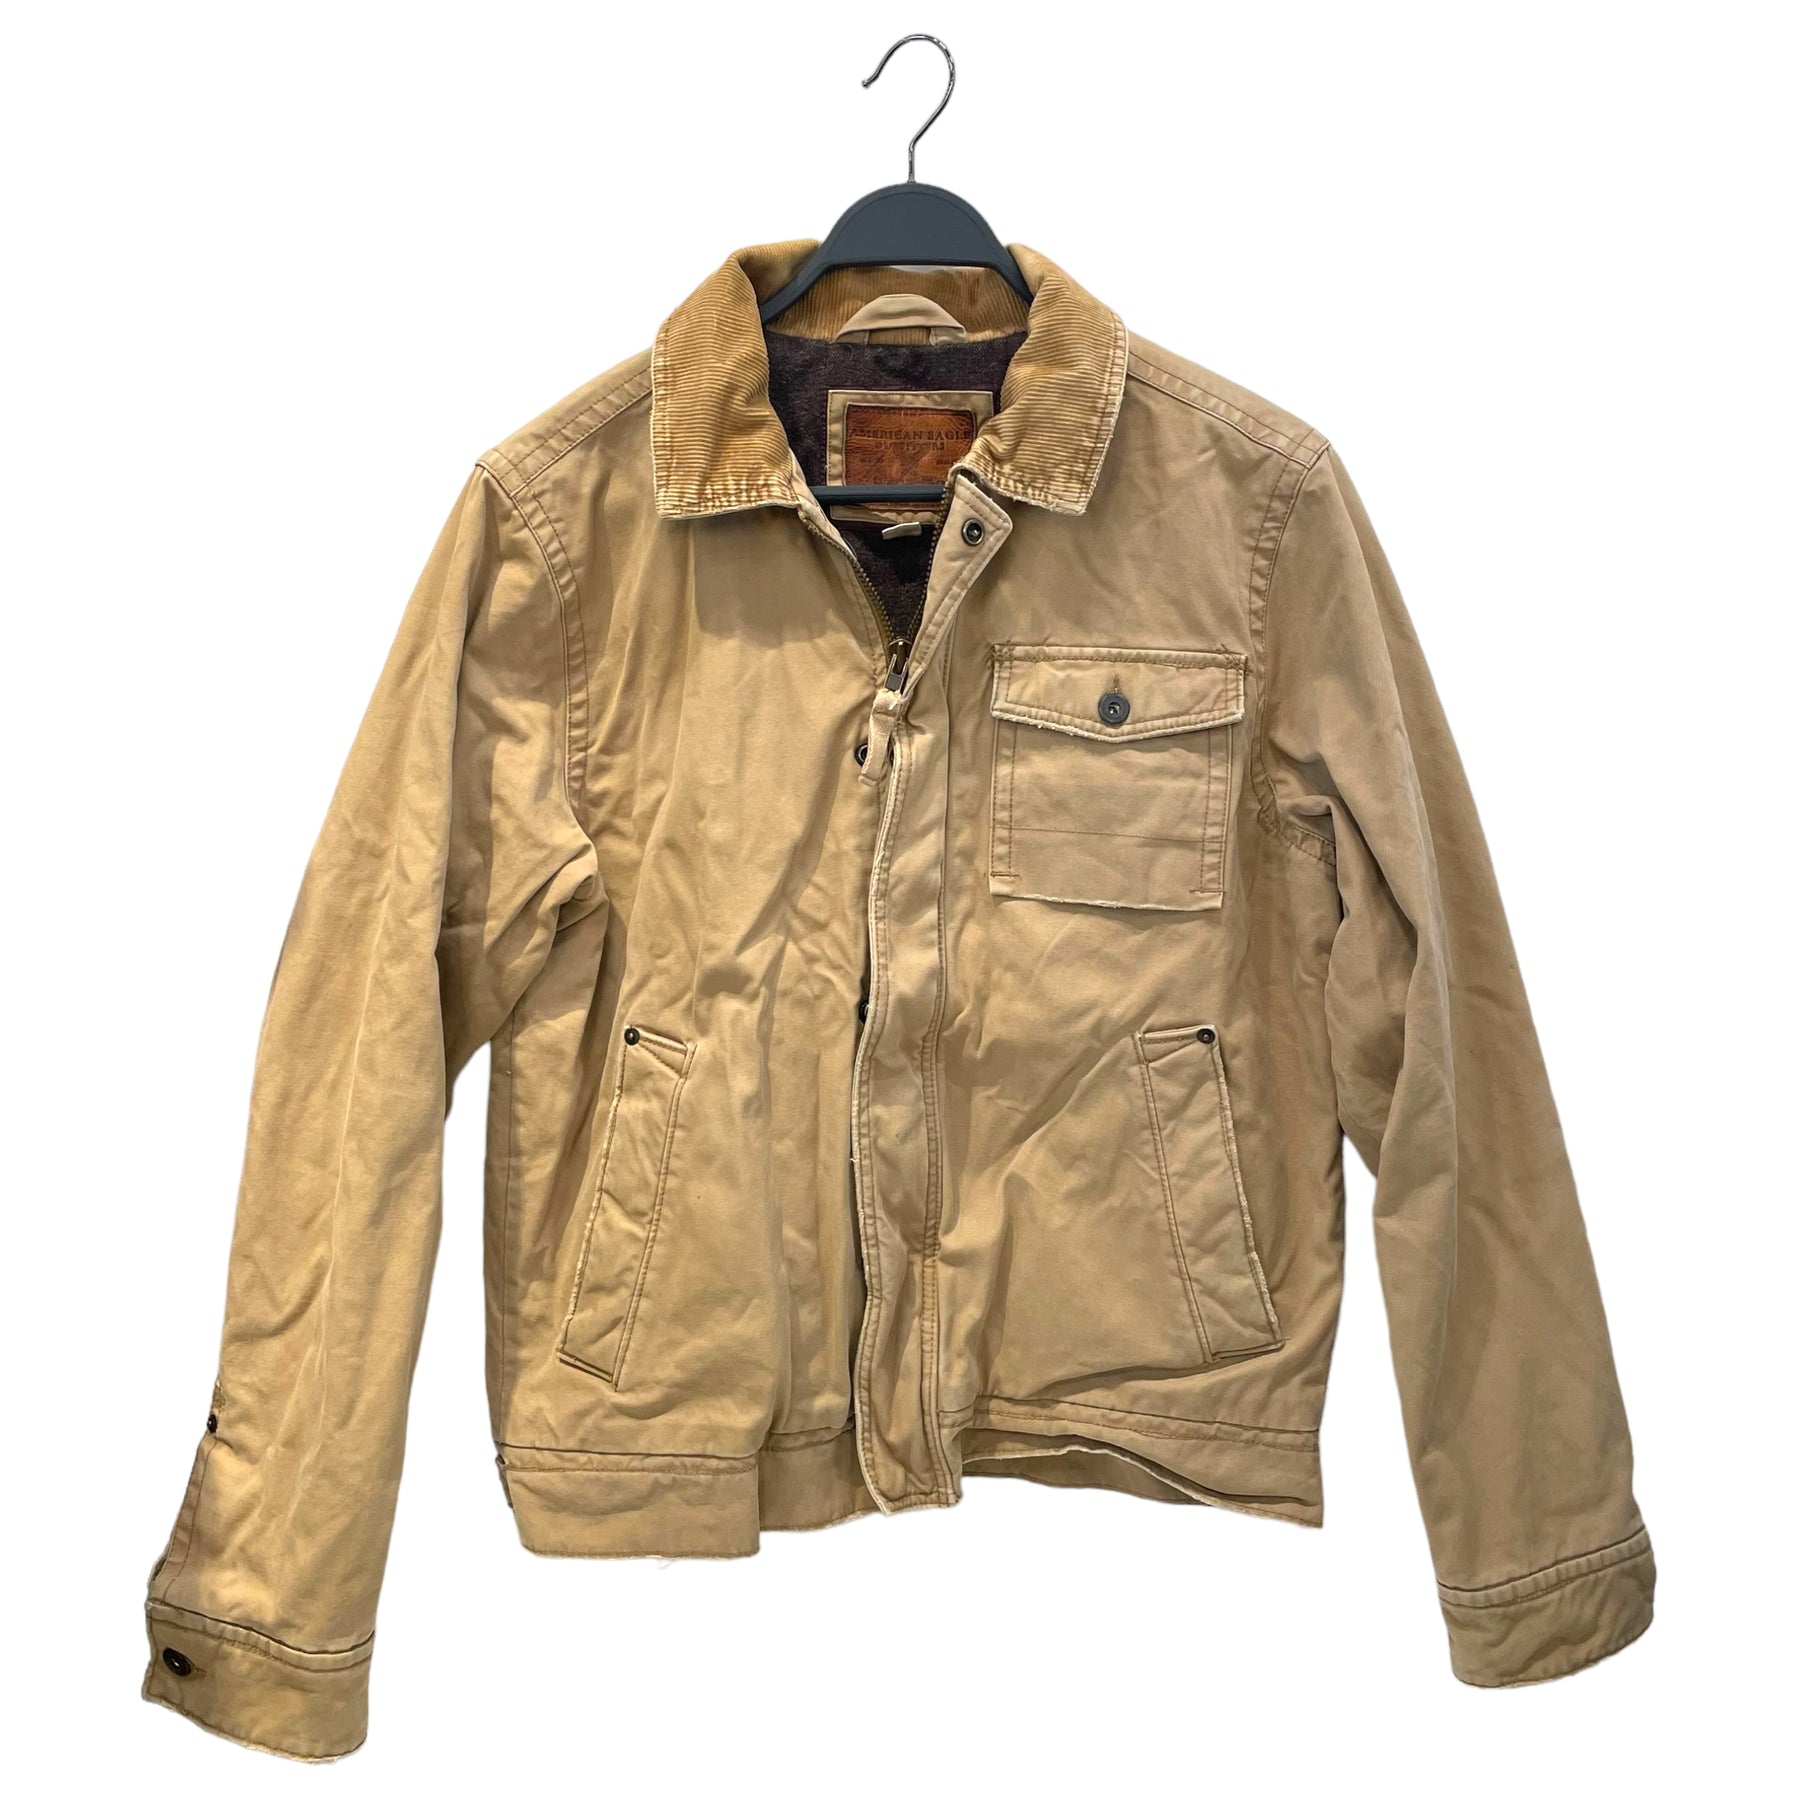 AMERICAN EAGLE/Jacket/M/Cotton/CML/ pic